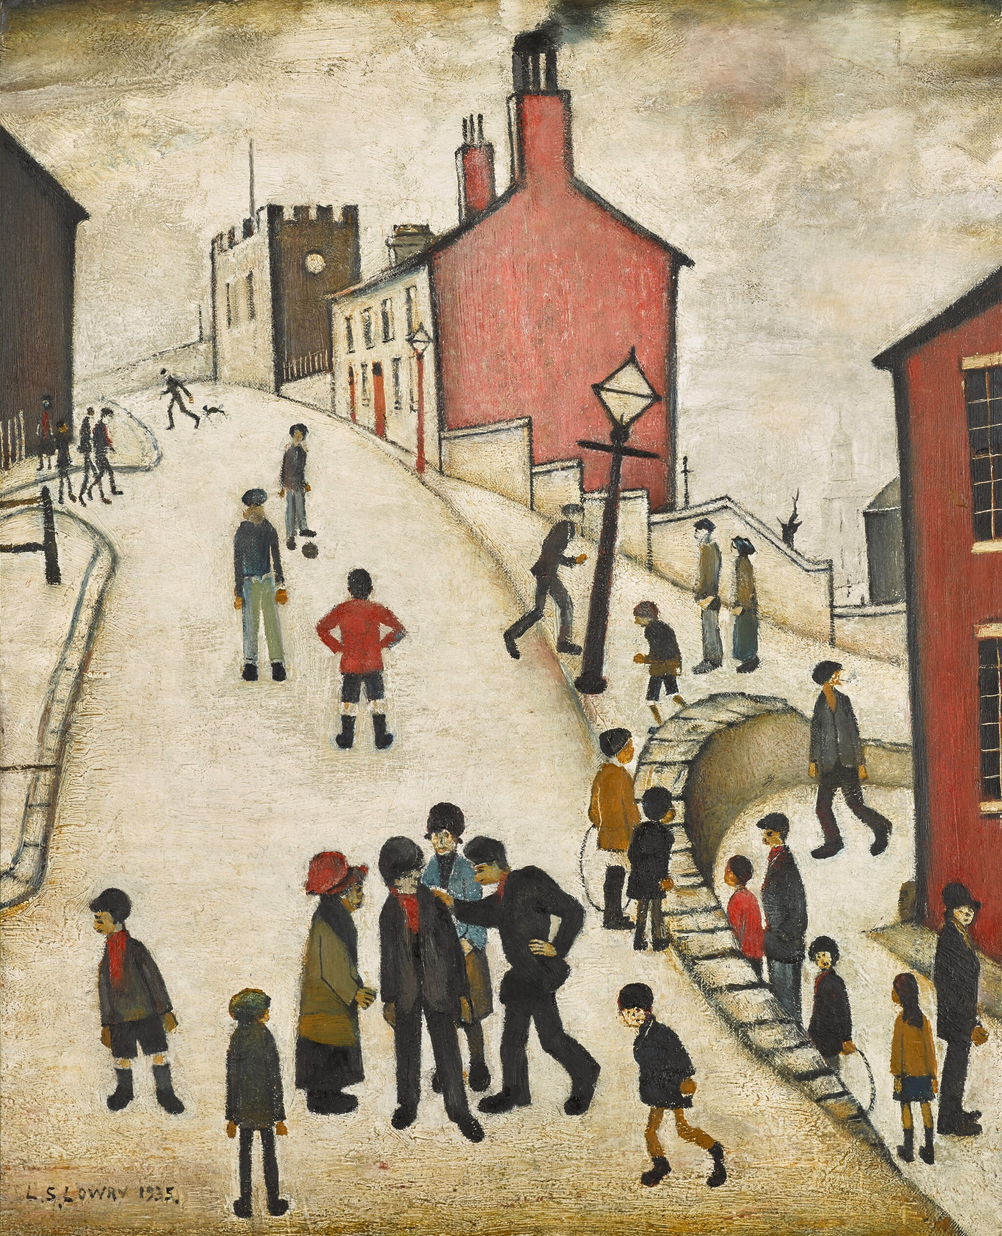 Road over Hill (1935) by Laurence Stephen Lowry (1887 - 1976), English artist.